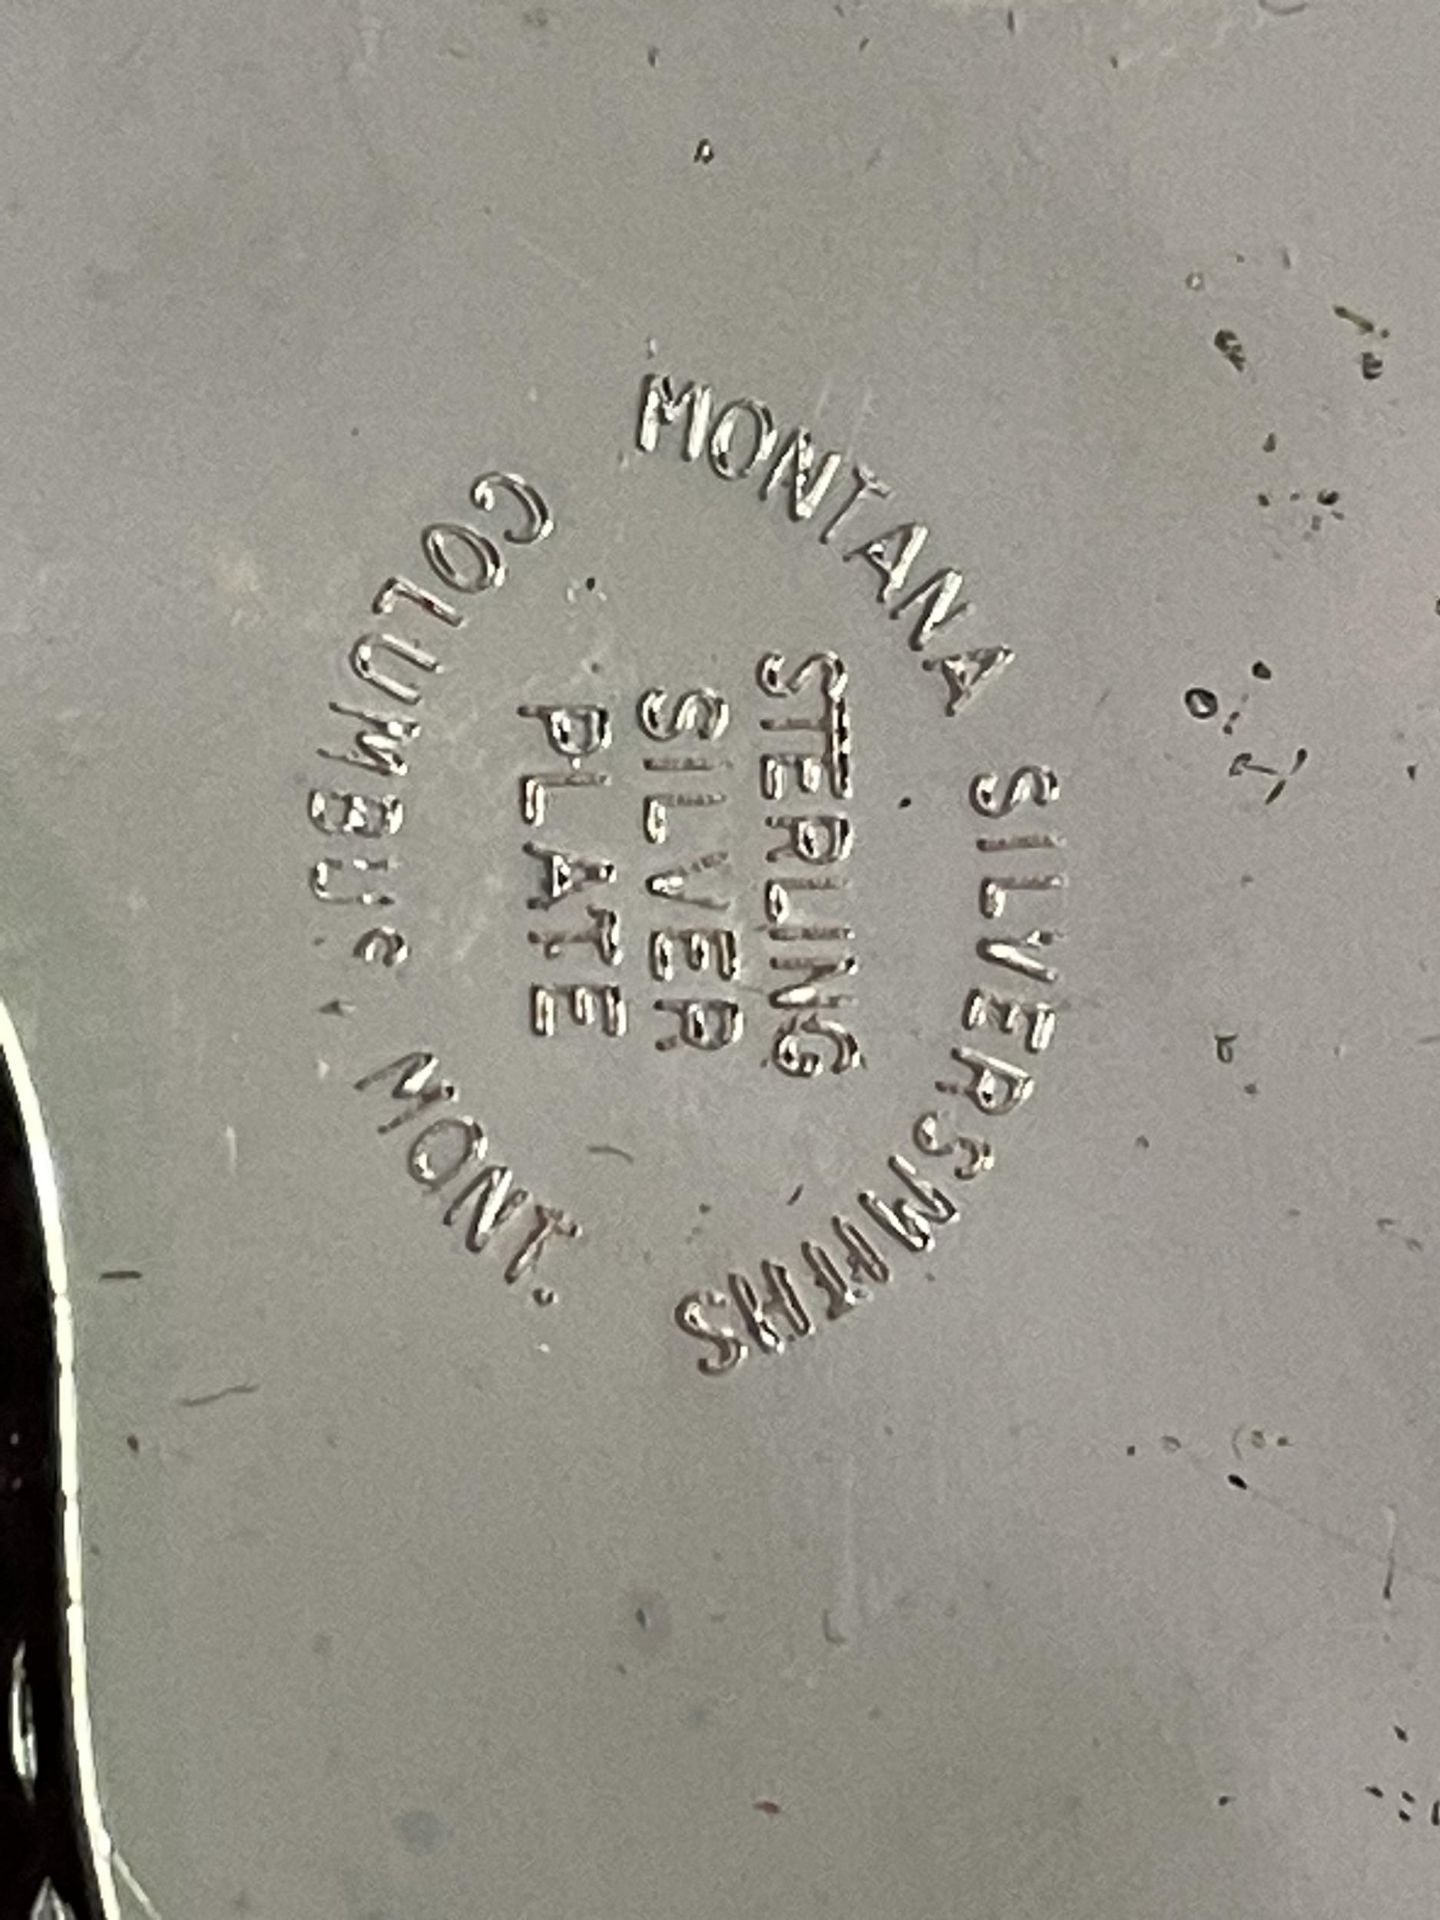 A BOXED STERLING SILVER PLATE AMERICAN BELT BUCKLE, STAMPED WITH MONTANA SILVER SMITHS MAKERS MARK - Image 4 of 4